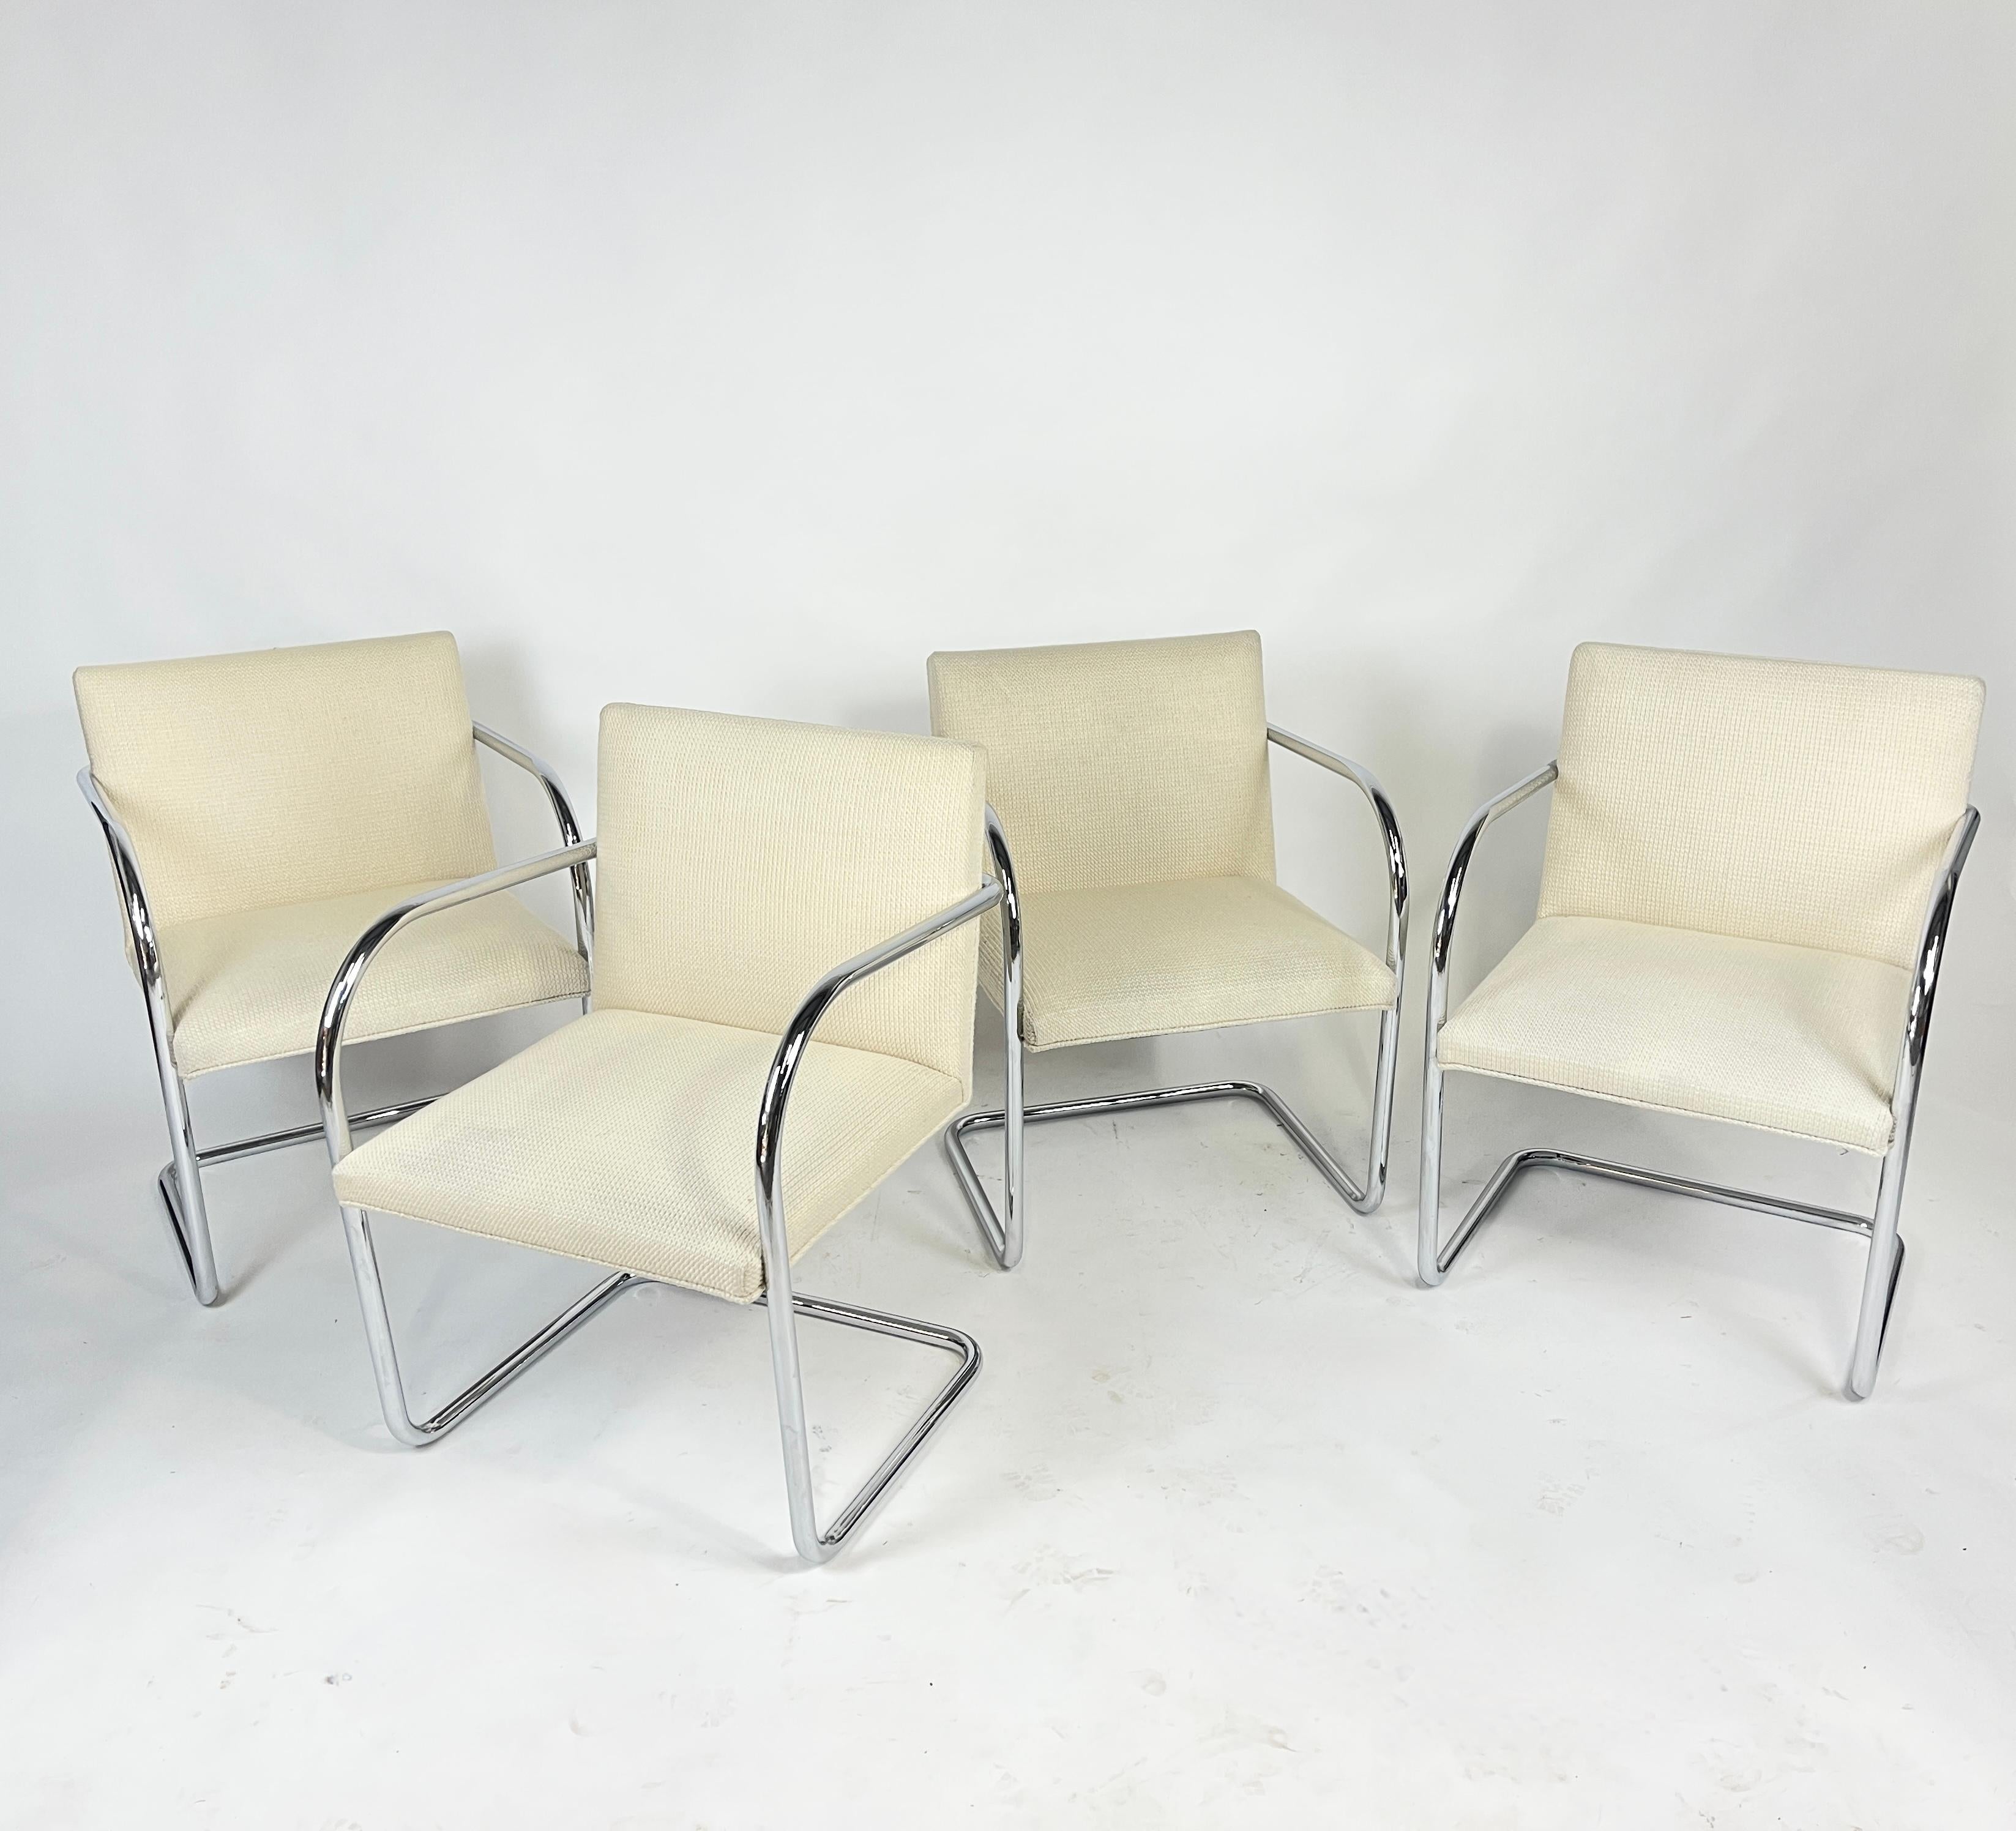 Set of 4 Knoll Brno chairs designed by Mies Van der Rohe. These chairs are upholstered in Knoll's Cato upholstery. Color is 'natural'- which reads as a pale oatmeal color. These chairs are from 2018 so in very nice condition. 

Cato Upholstery in